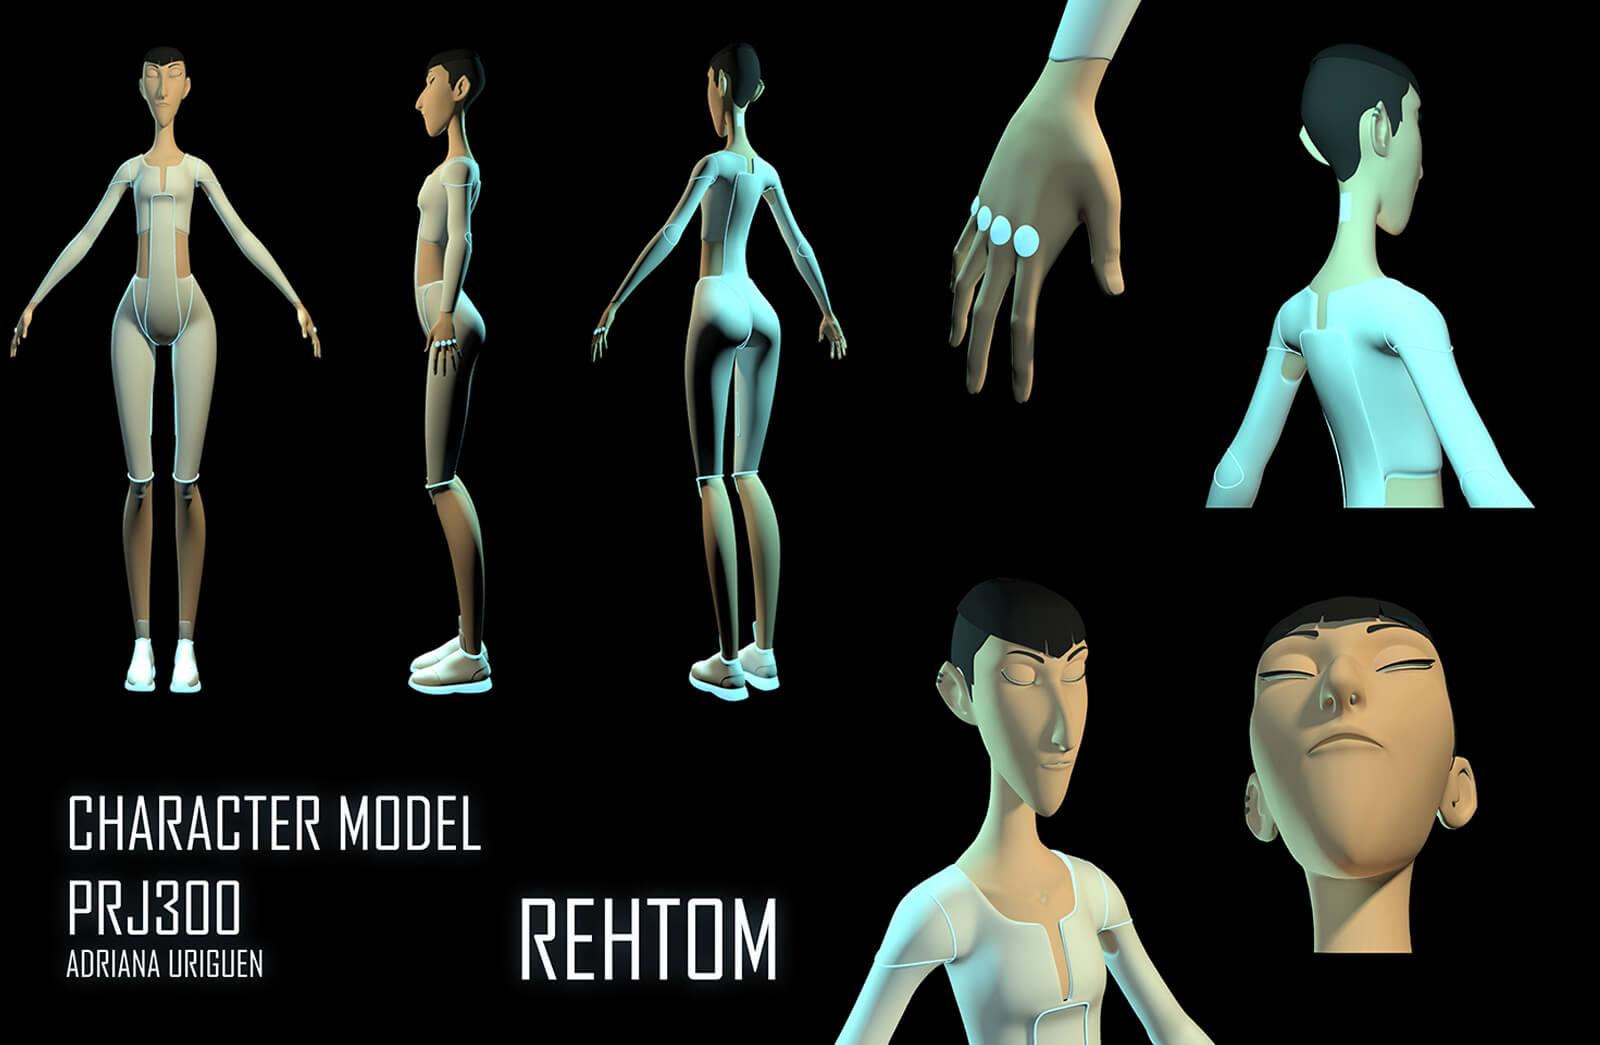 3D character model of a tall, thin woman standing in futuristic white clothing from different angles